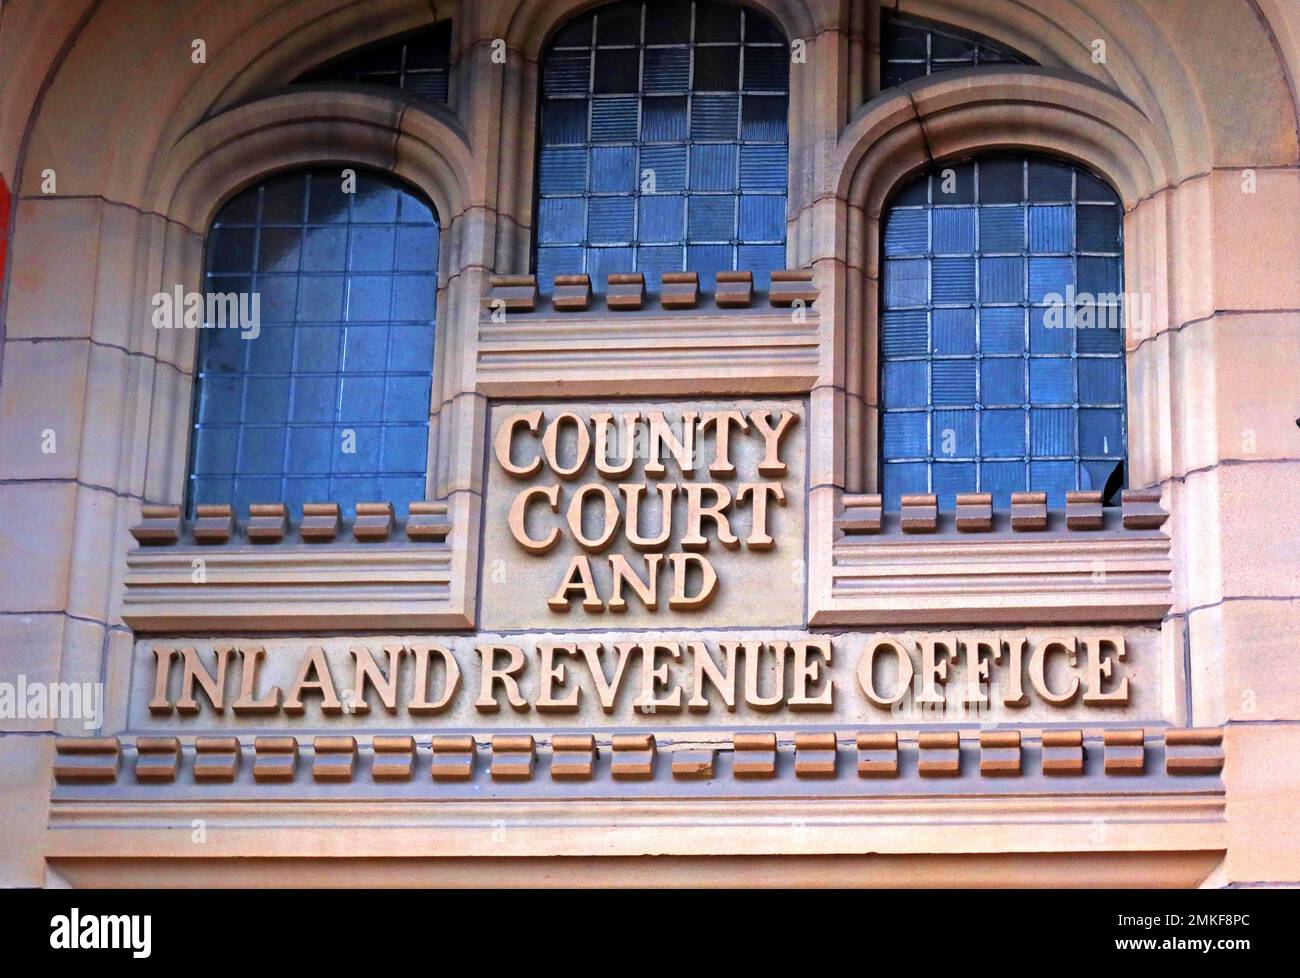 County Court and Inland revenue Office 1887, The Old Courts, Crawford Street, Wigan, Lancashire, England,UK, WN1 1NA Stock Photo